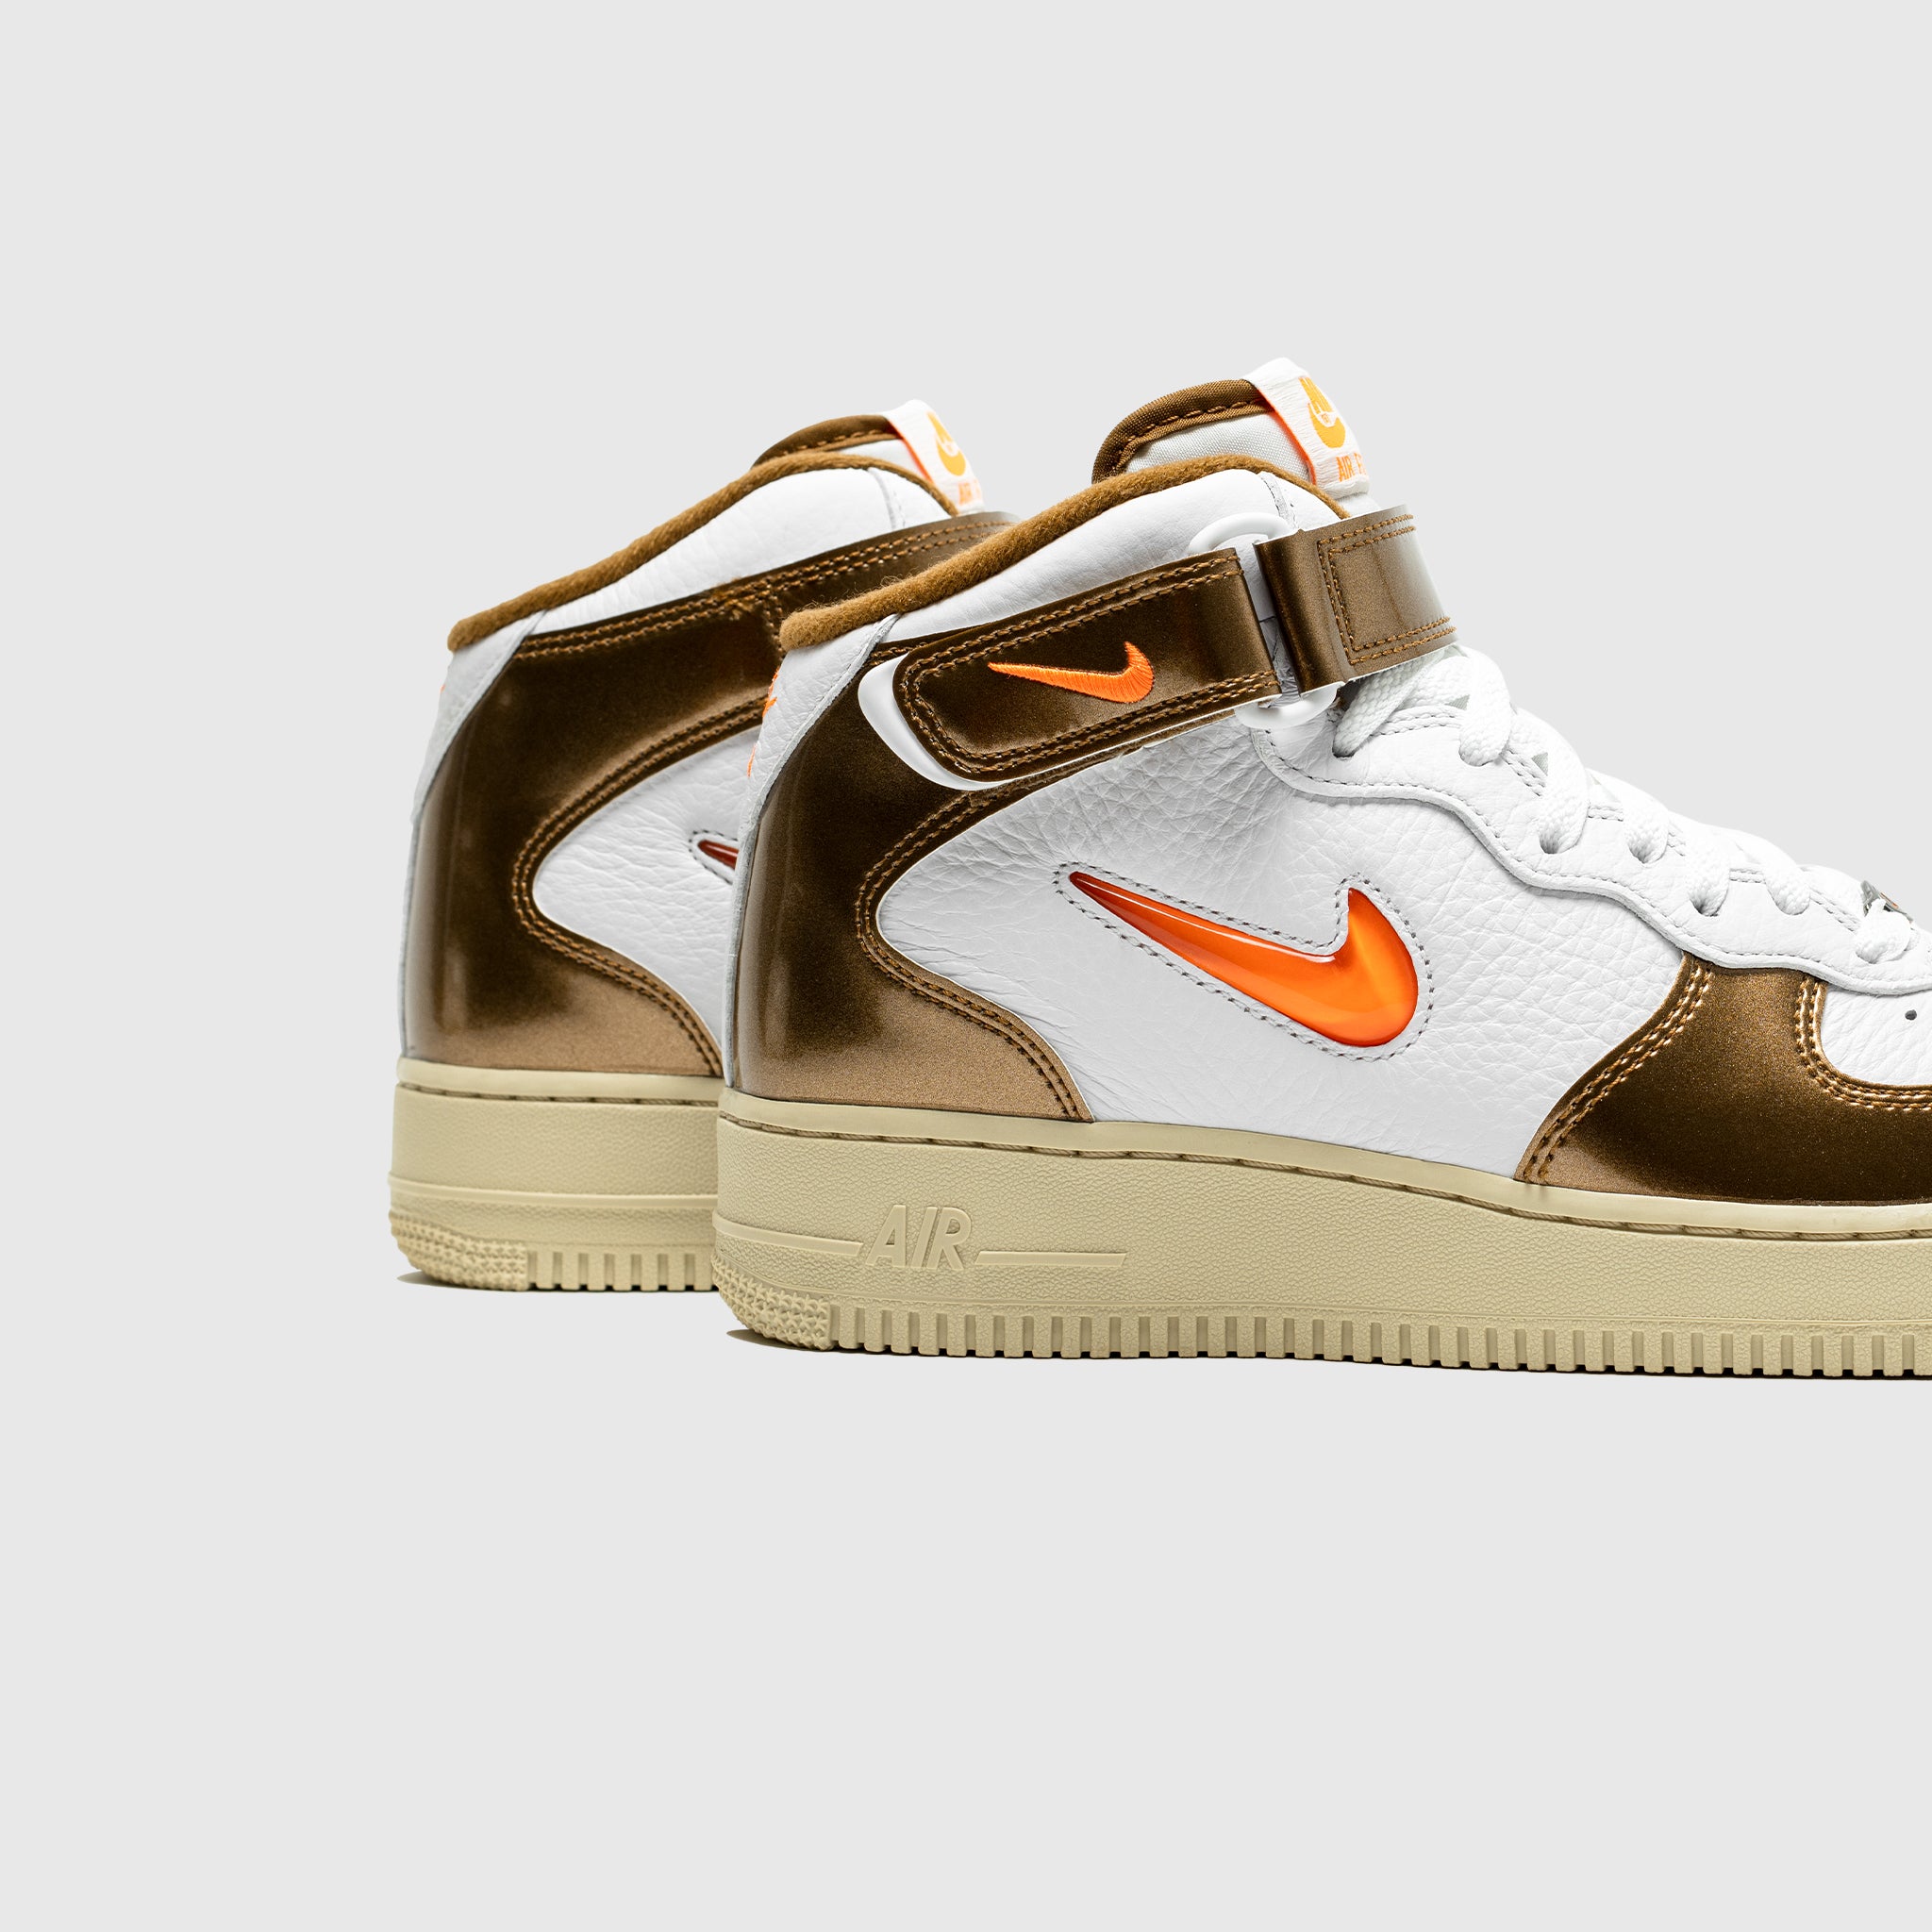 Nike Air Force 1 '07 Mid Sneakers in White and Brown